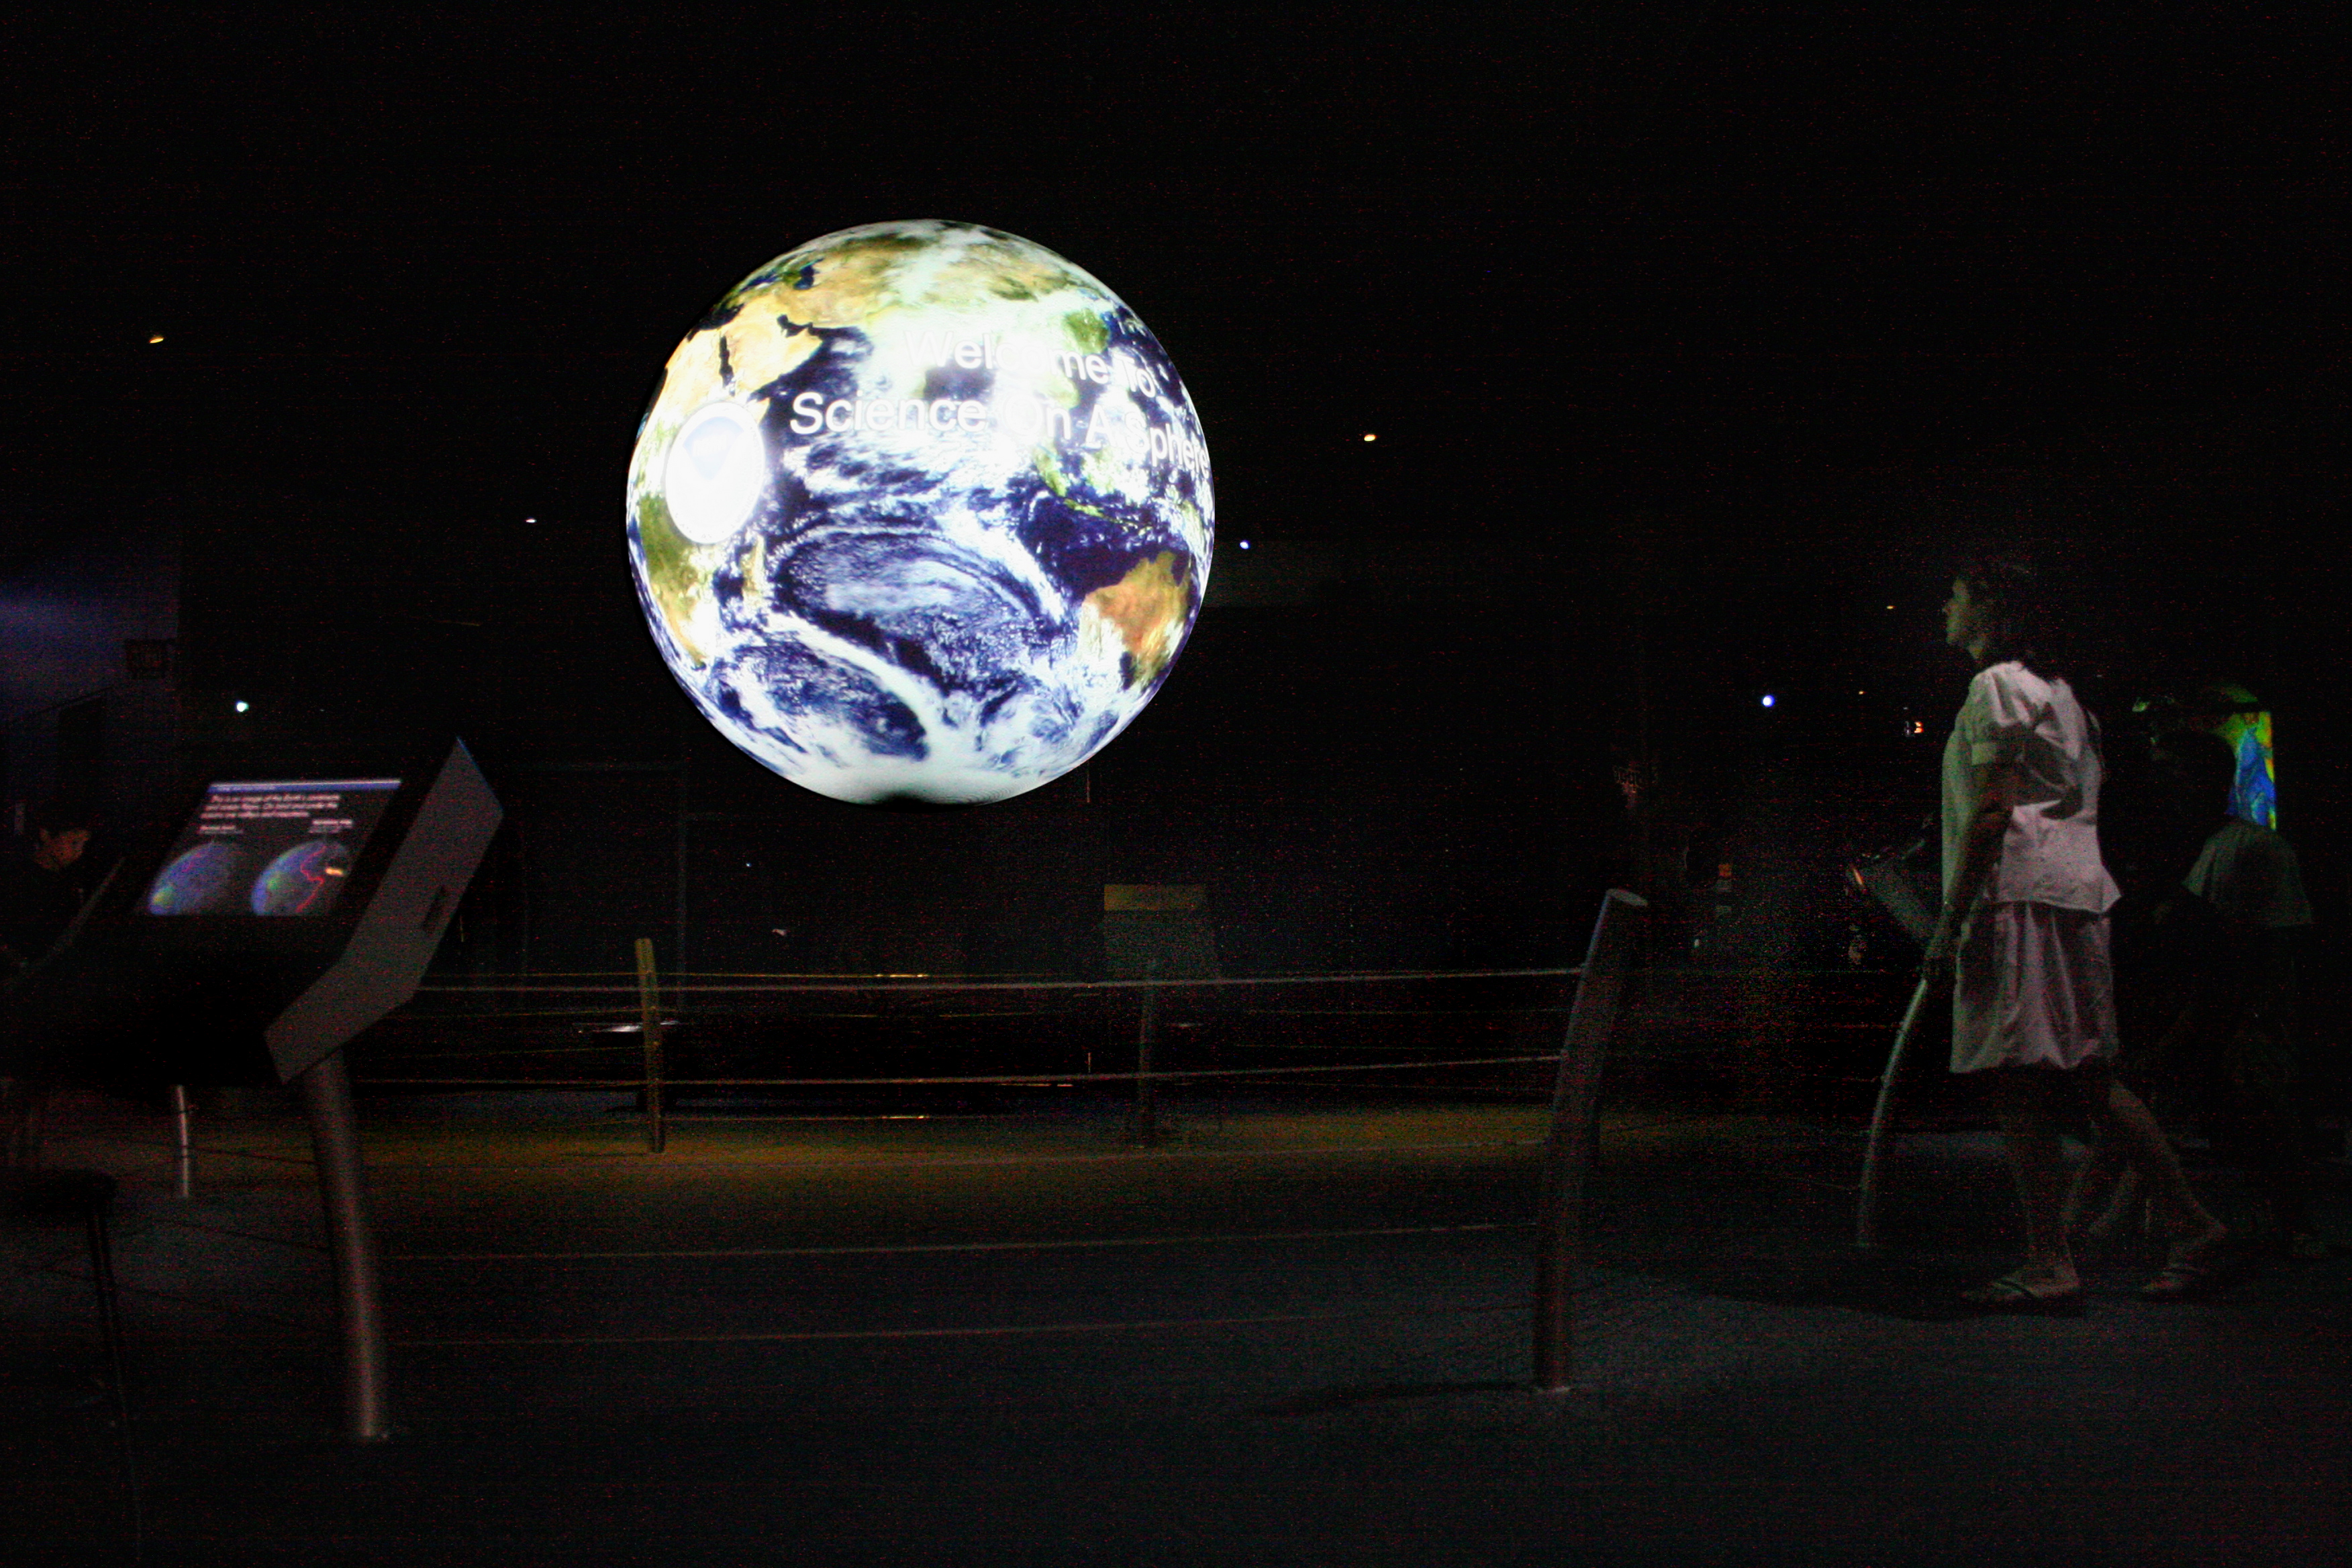 Science On a Sphere displays satellite imagery of Earth in a darkened room. In the foreground, a small screen is attached to the rail displaying additional information. Two museum patrons are standing at the right of the image watching the Sphere